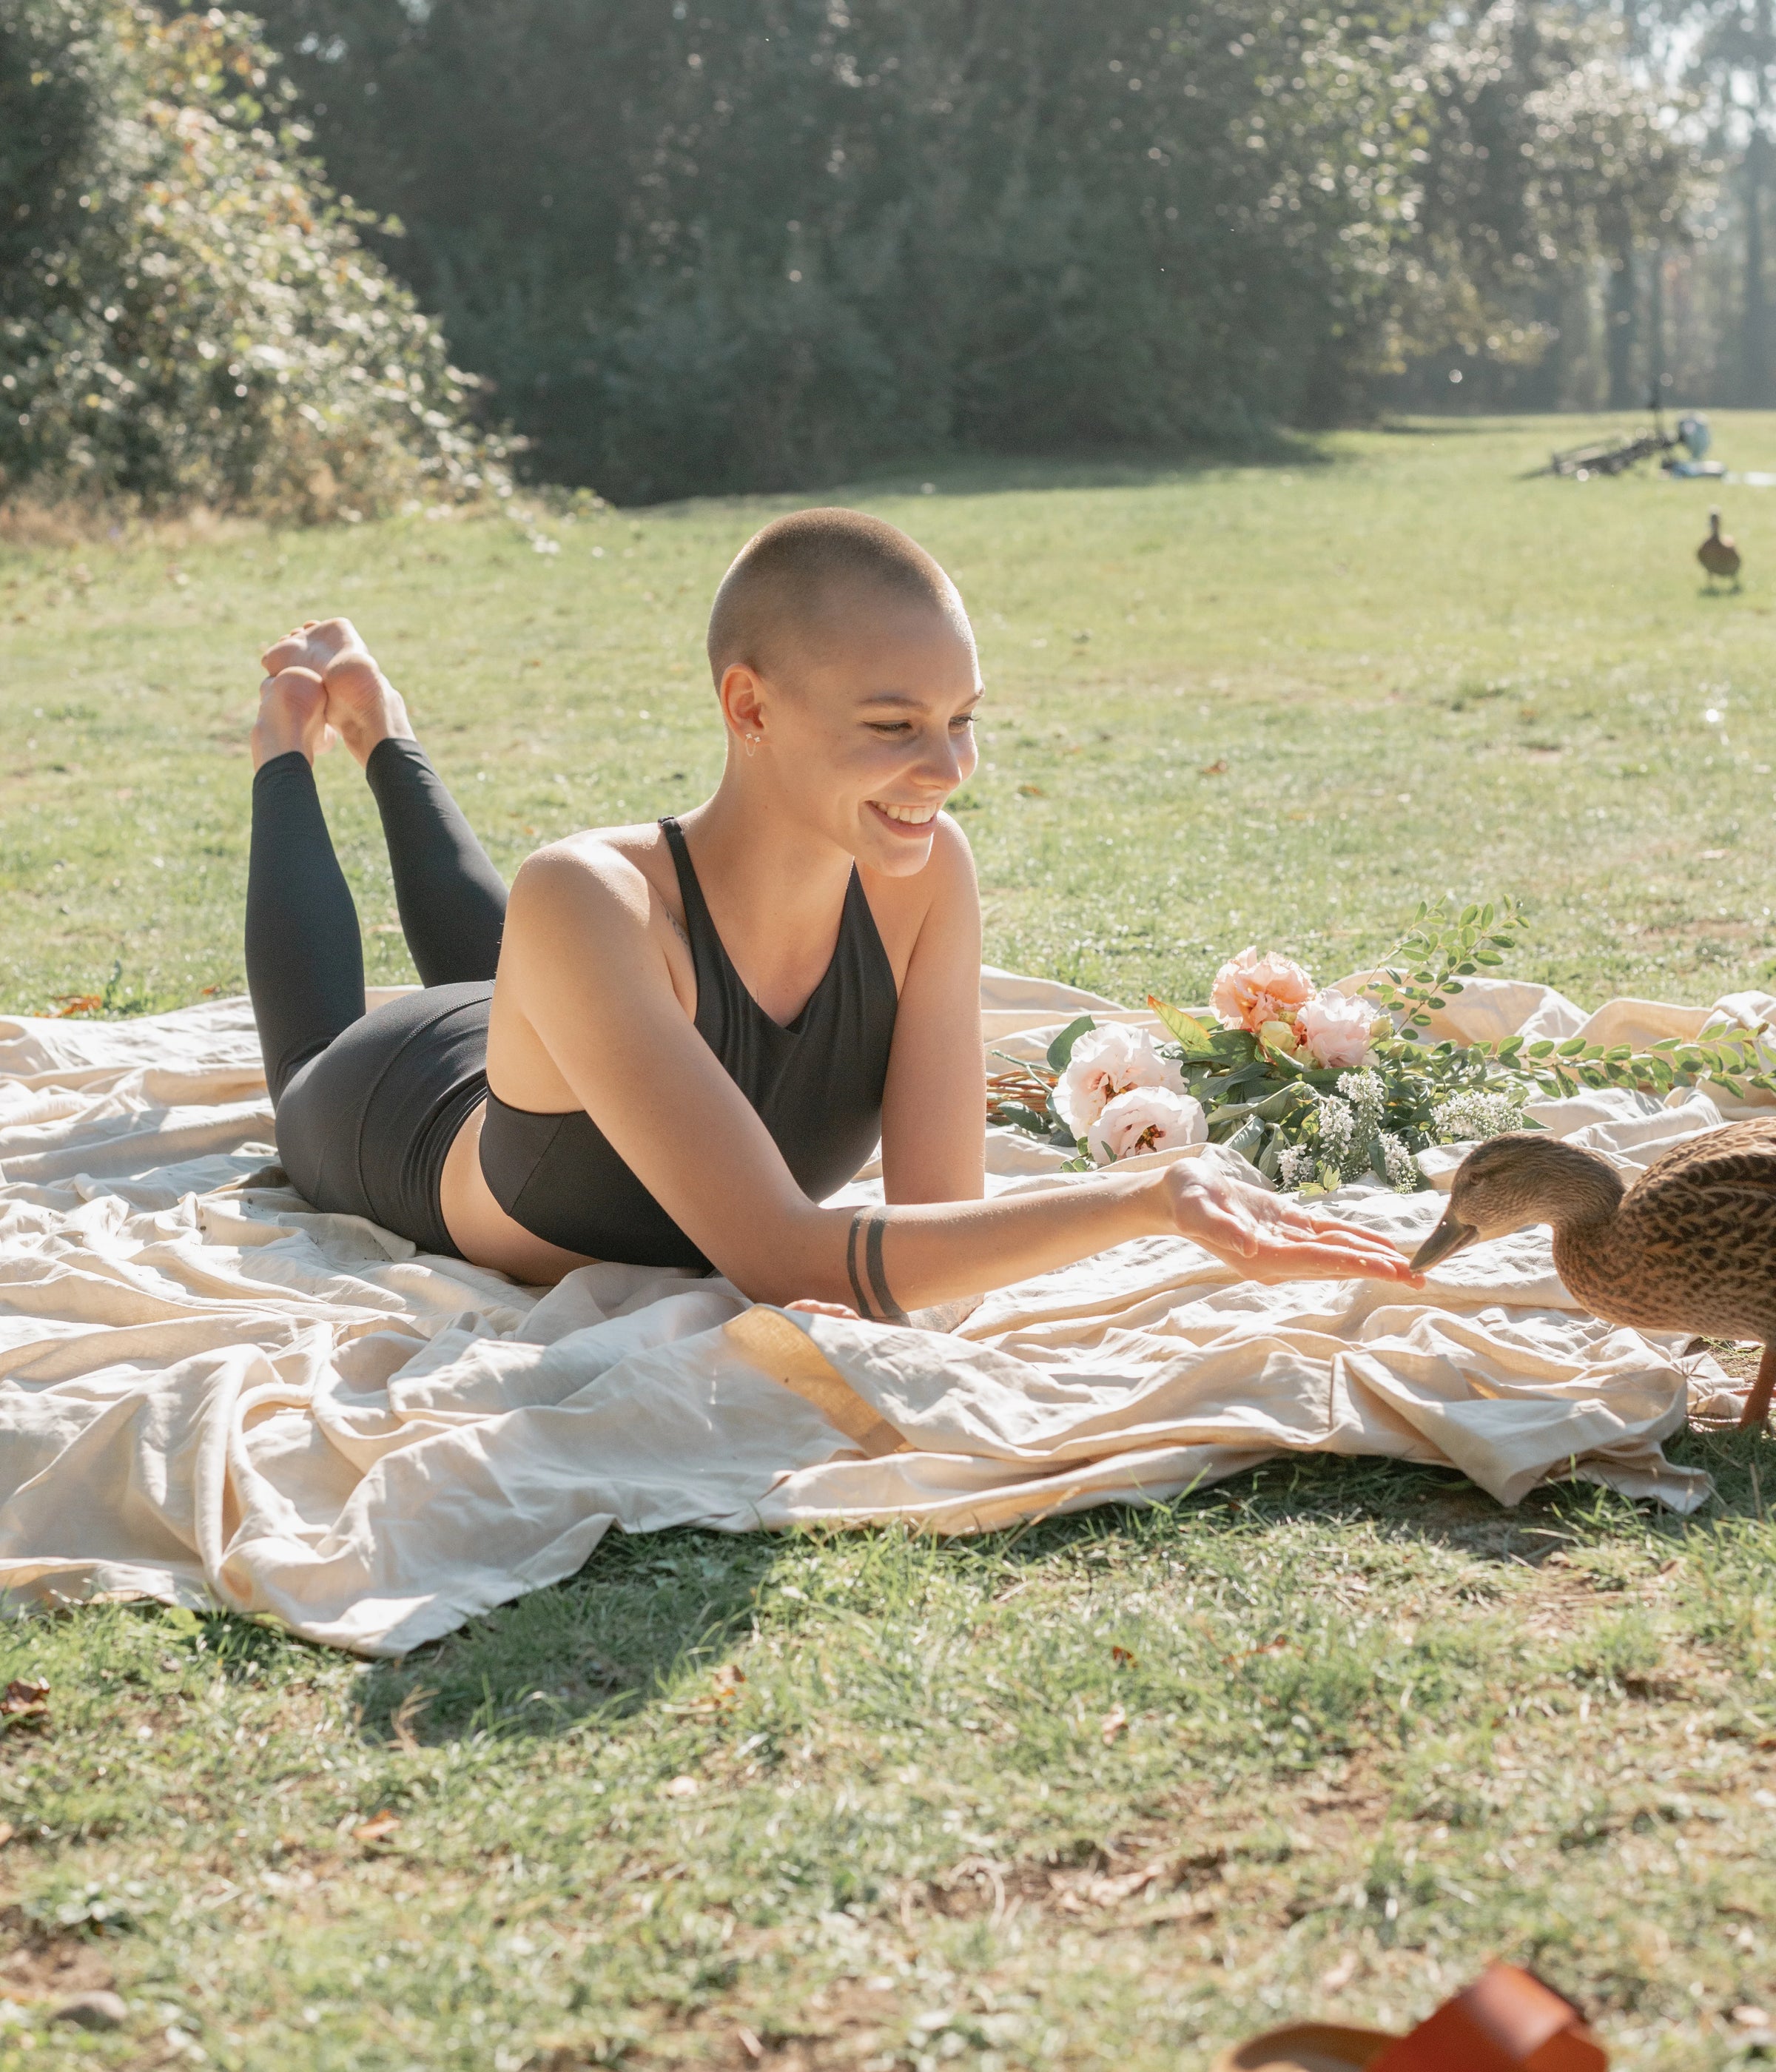 Woman in a black sports bra and leggings laying on a blanket outside and feeding a duck.